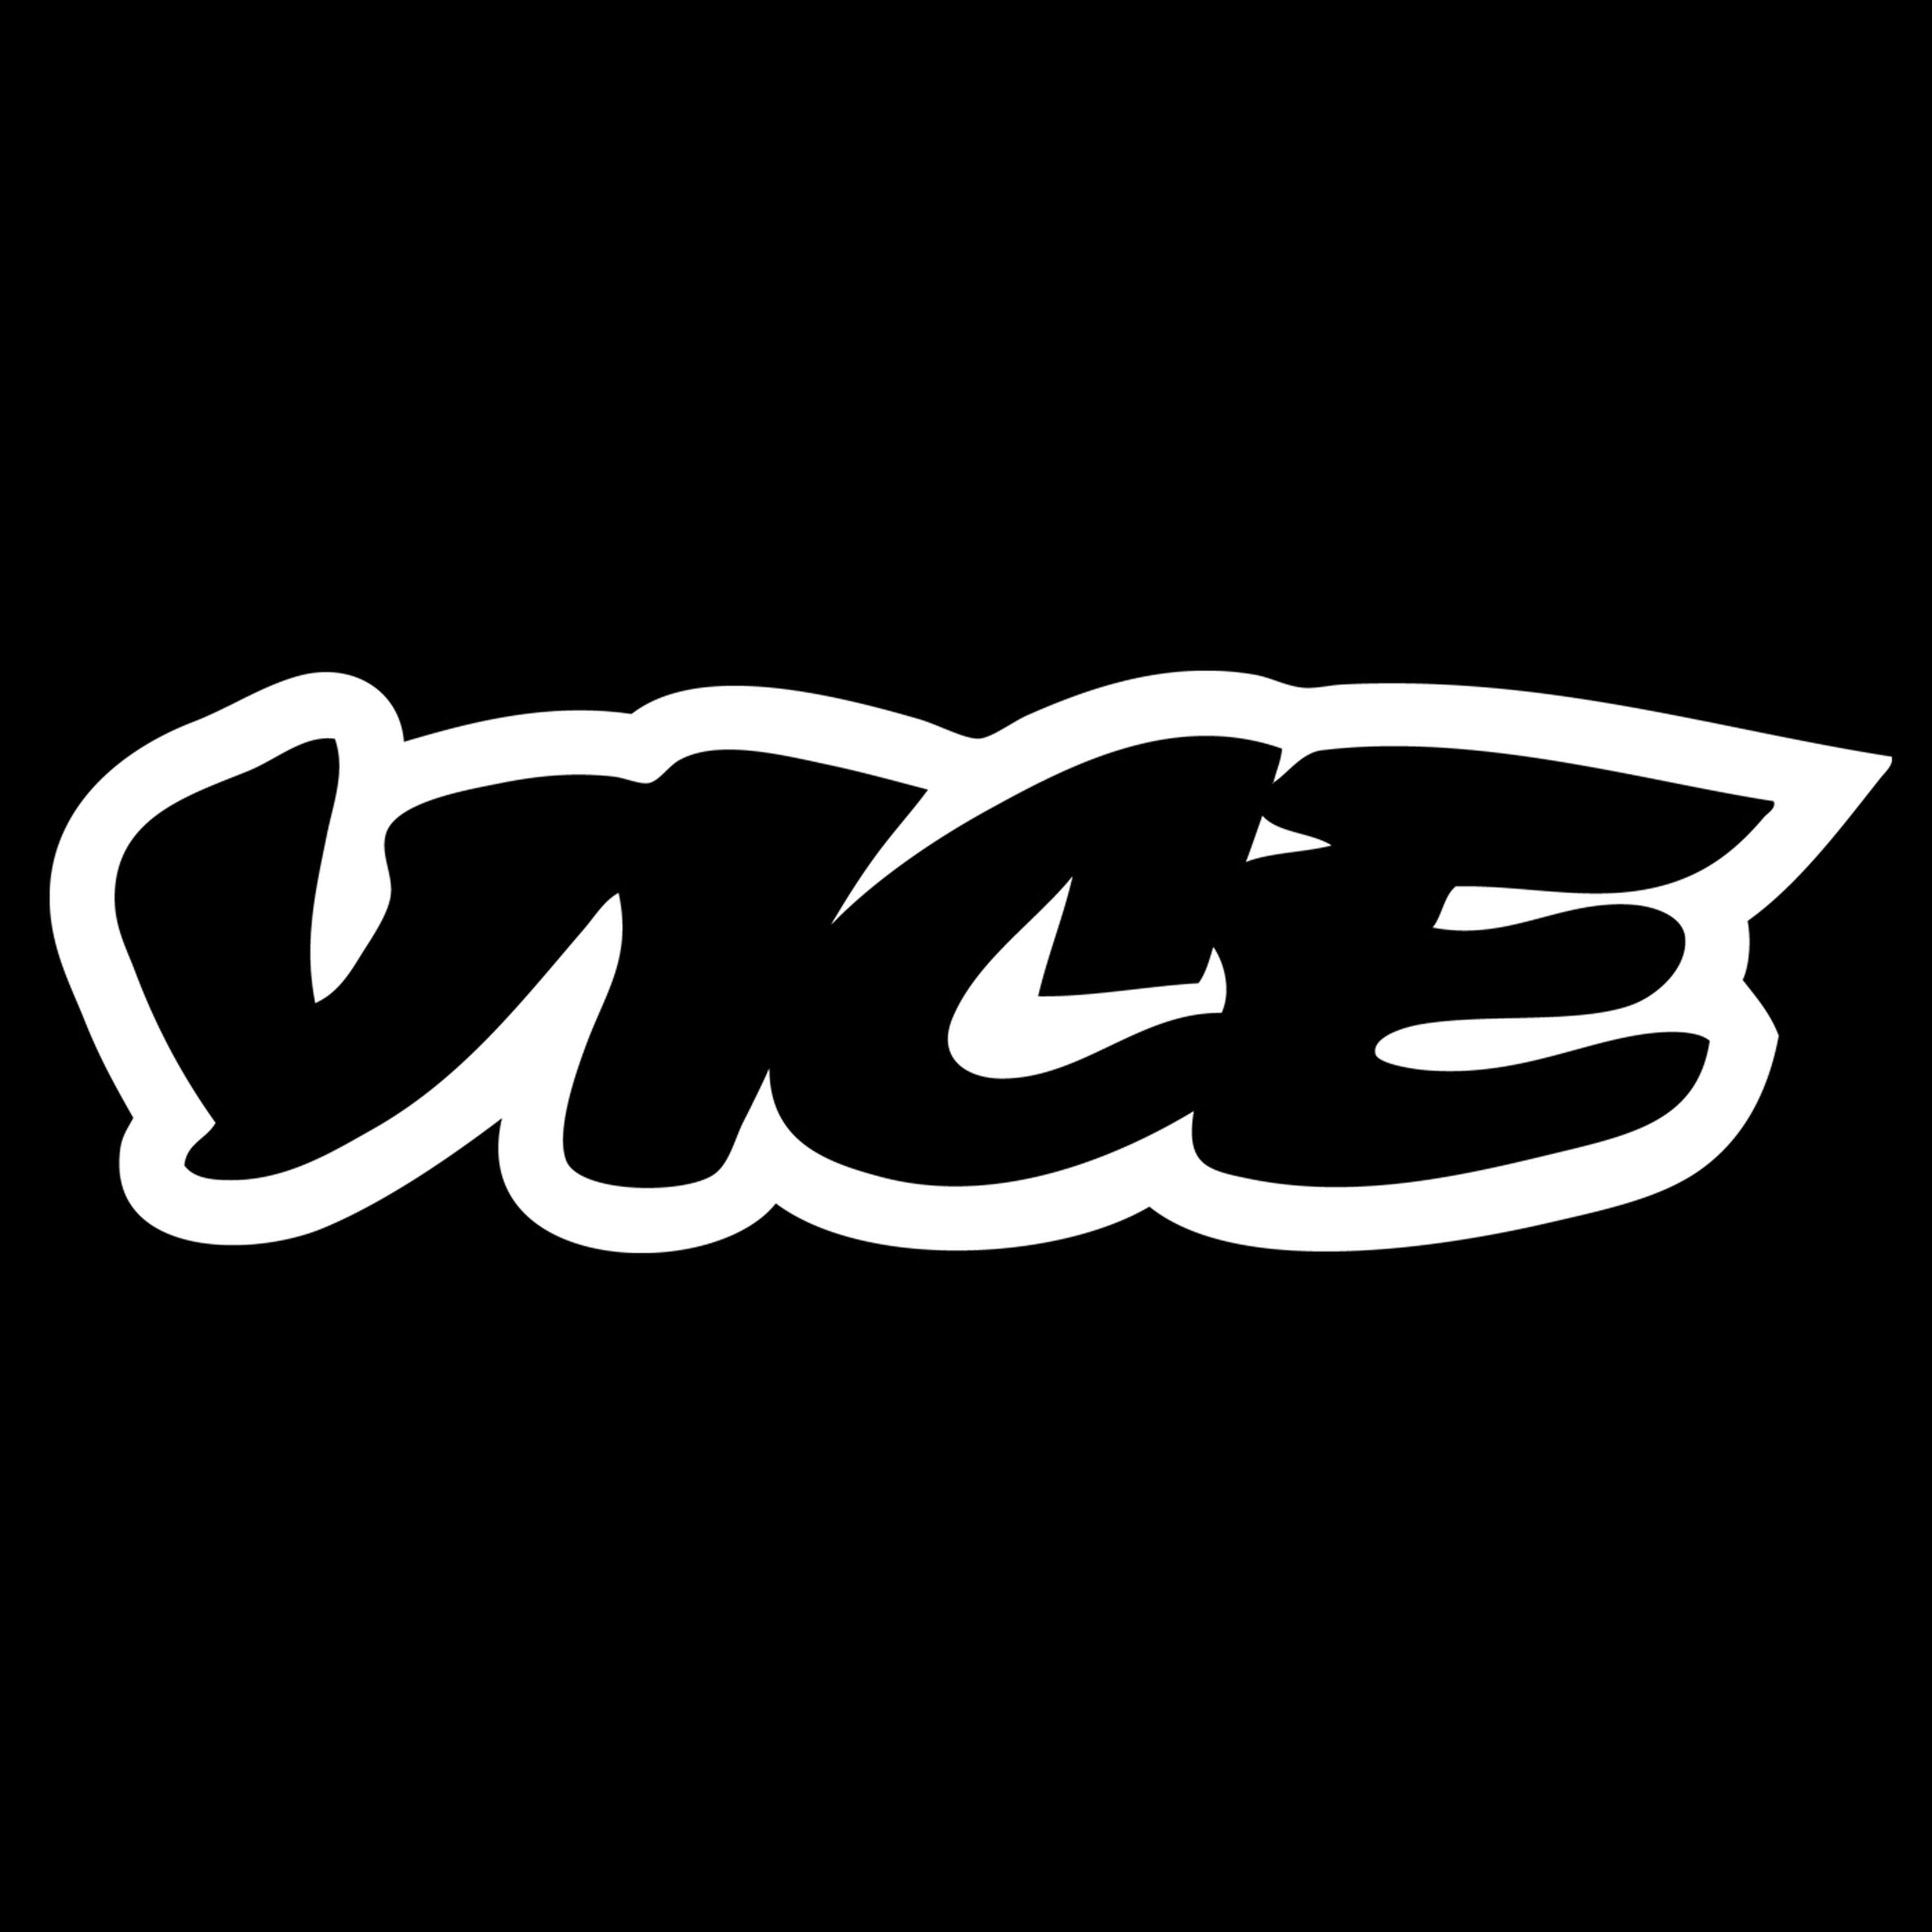 Errol Morris on "The Unknown Known": The VICE Podcast Show 039